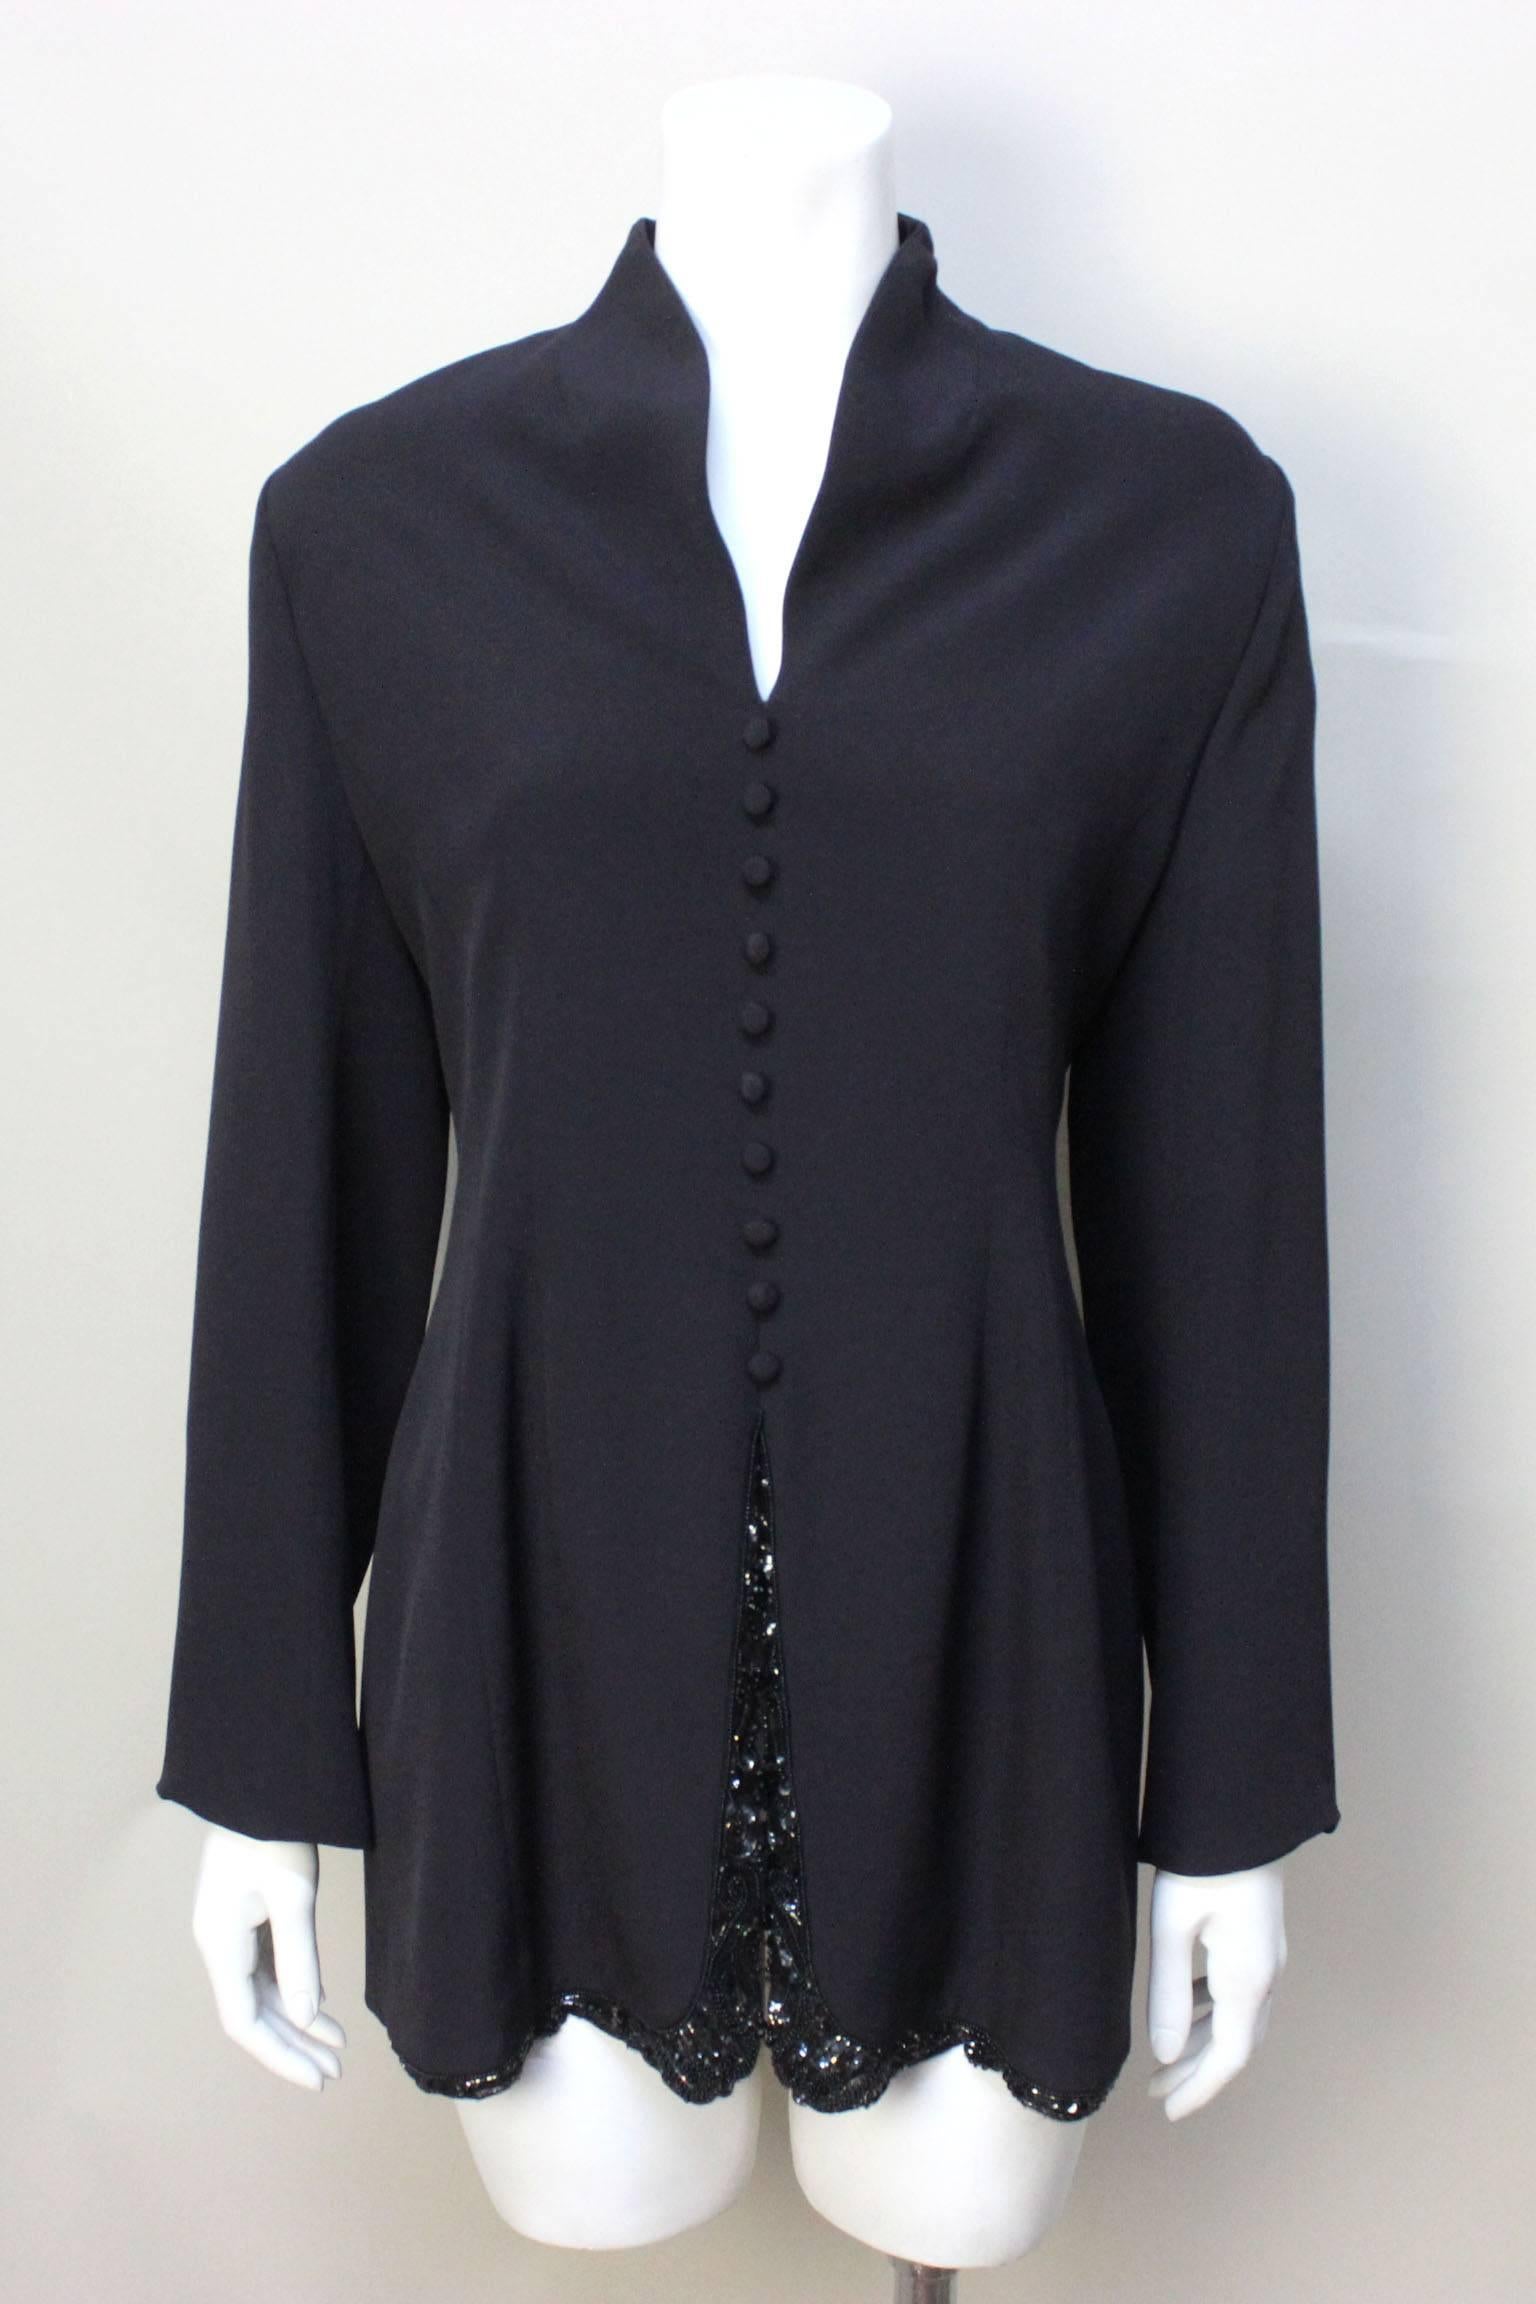 This elegant tunic was sold in the designer penthouse of the upscale Miss Jackson's in Tulsa. The jacket drapes beautifully with a slightly flared bottom. The jacket has ten covered buttons down the front as well as a slit adorned with delicate